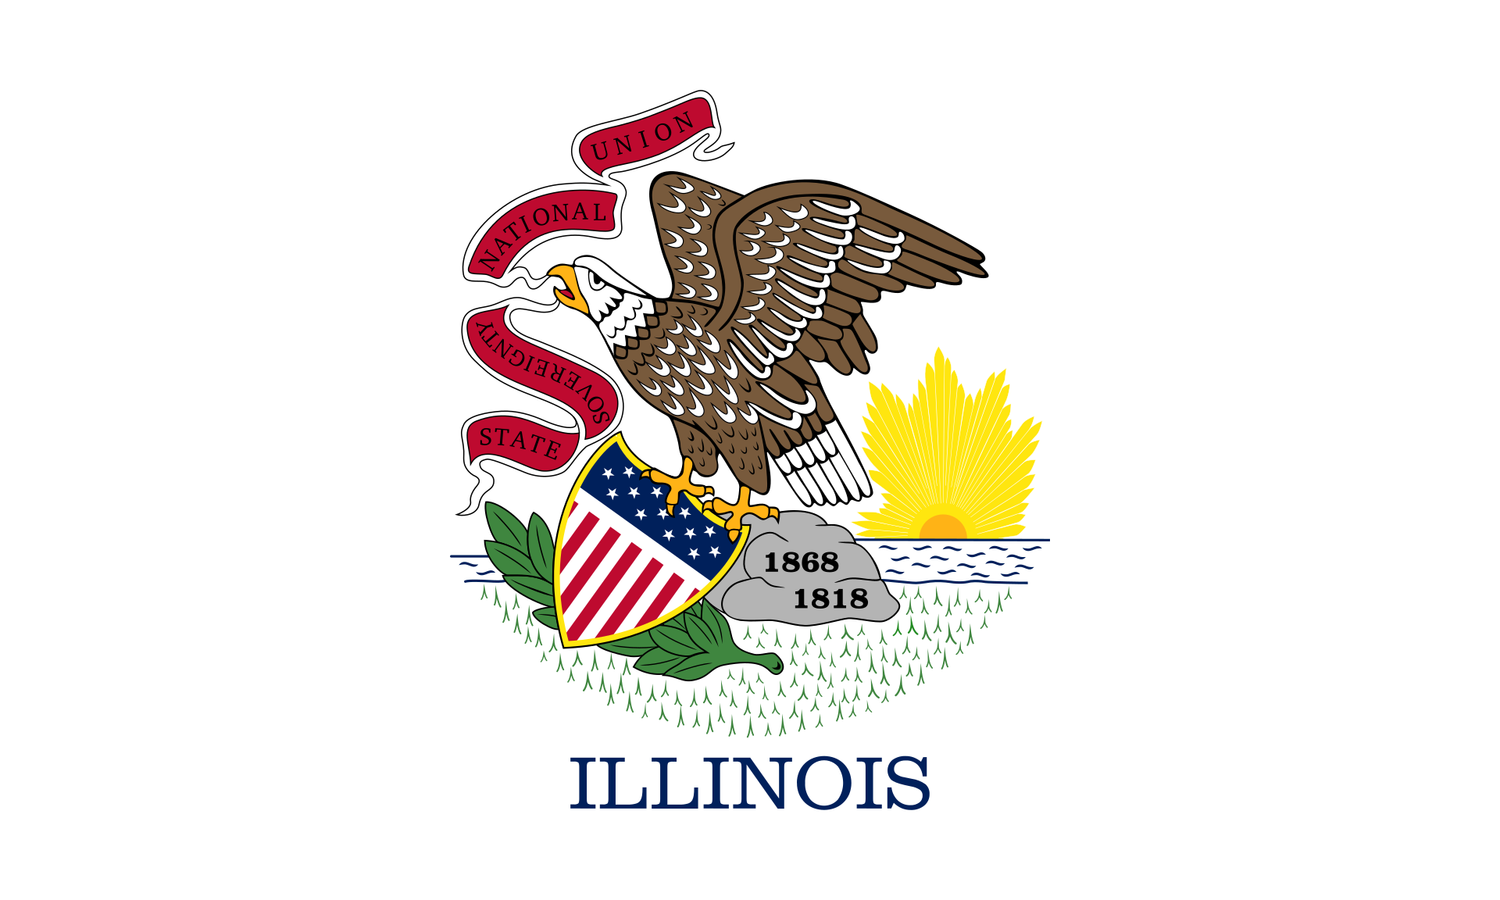 The official state flag of Illinois was adopted in 1969 and features the Great Seal of Illinois. - History By Mail